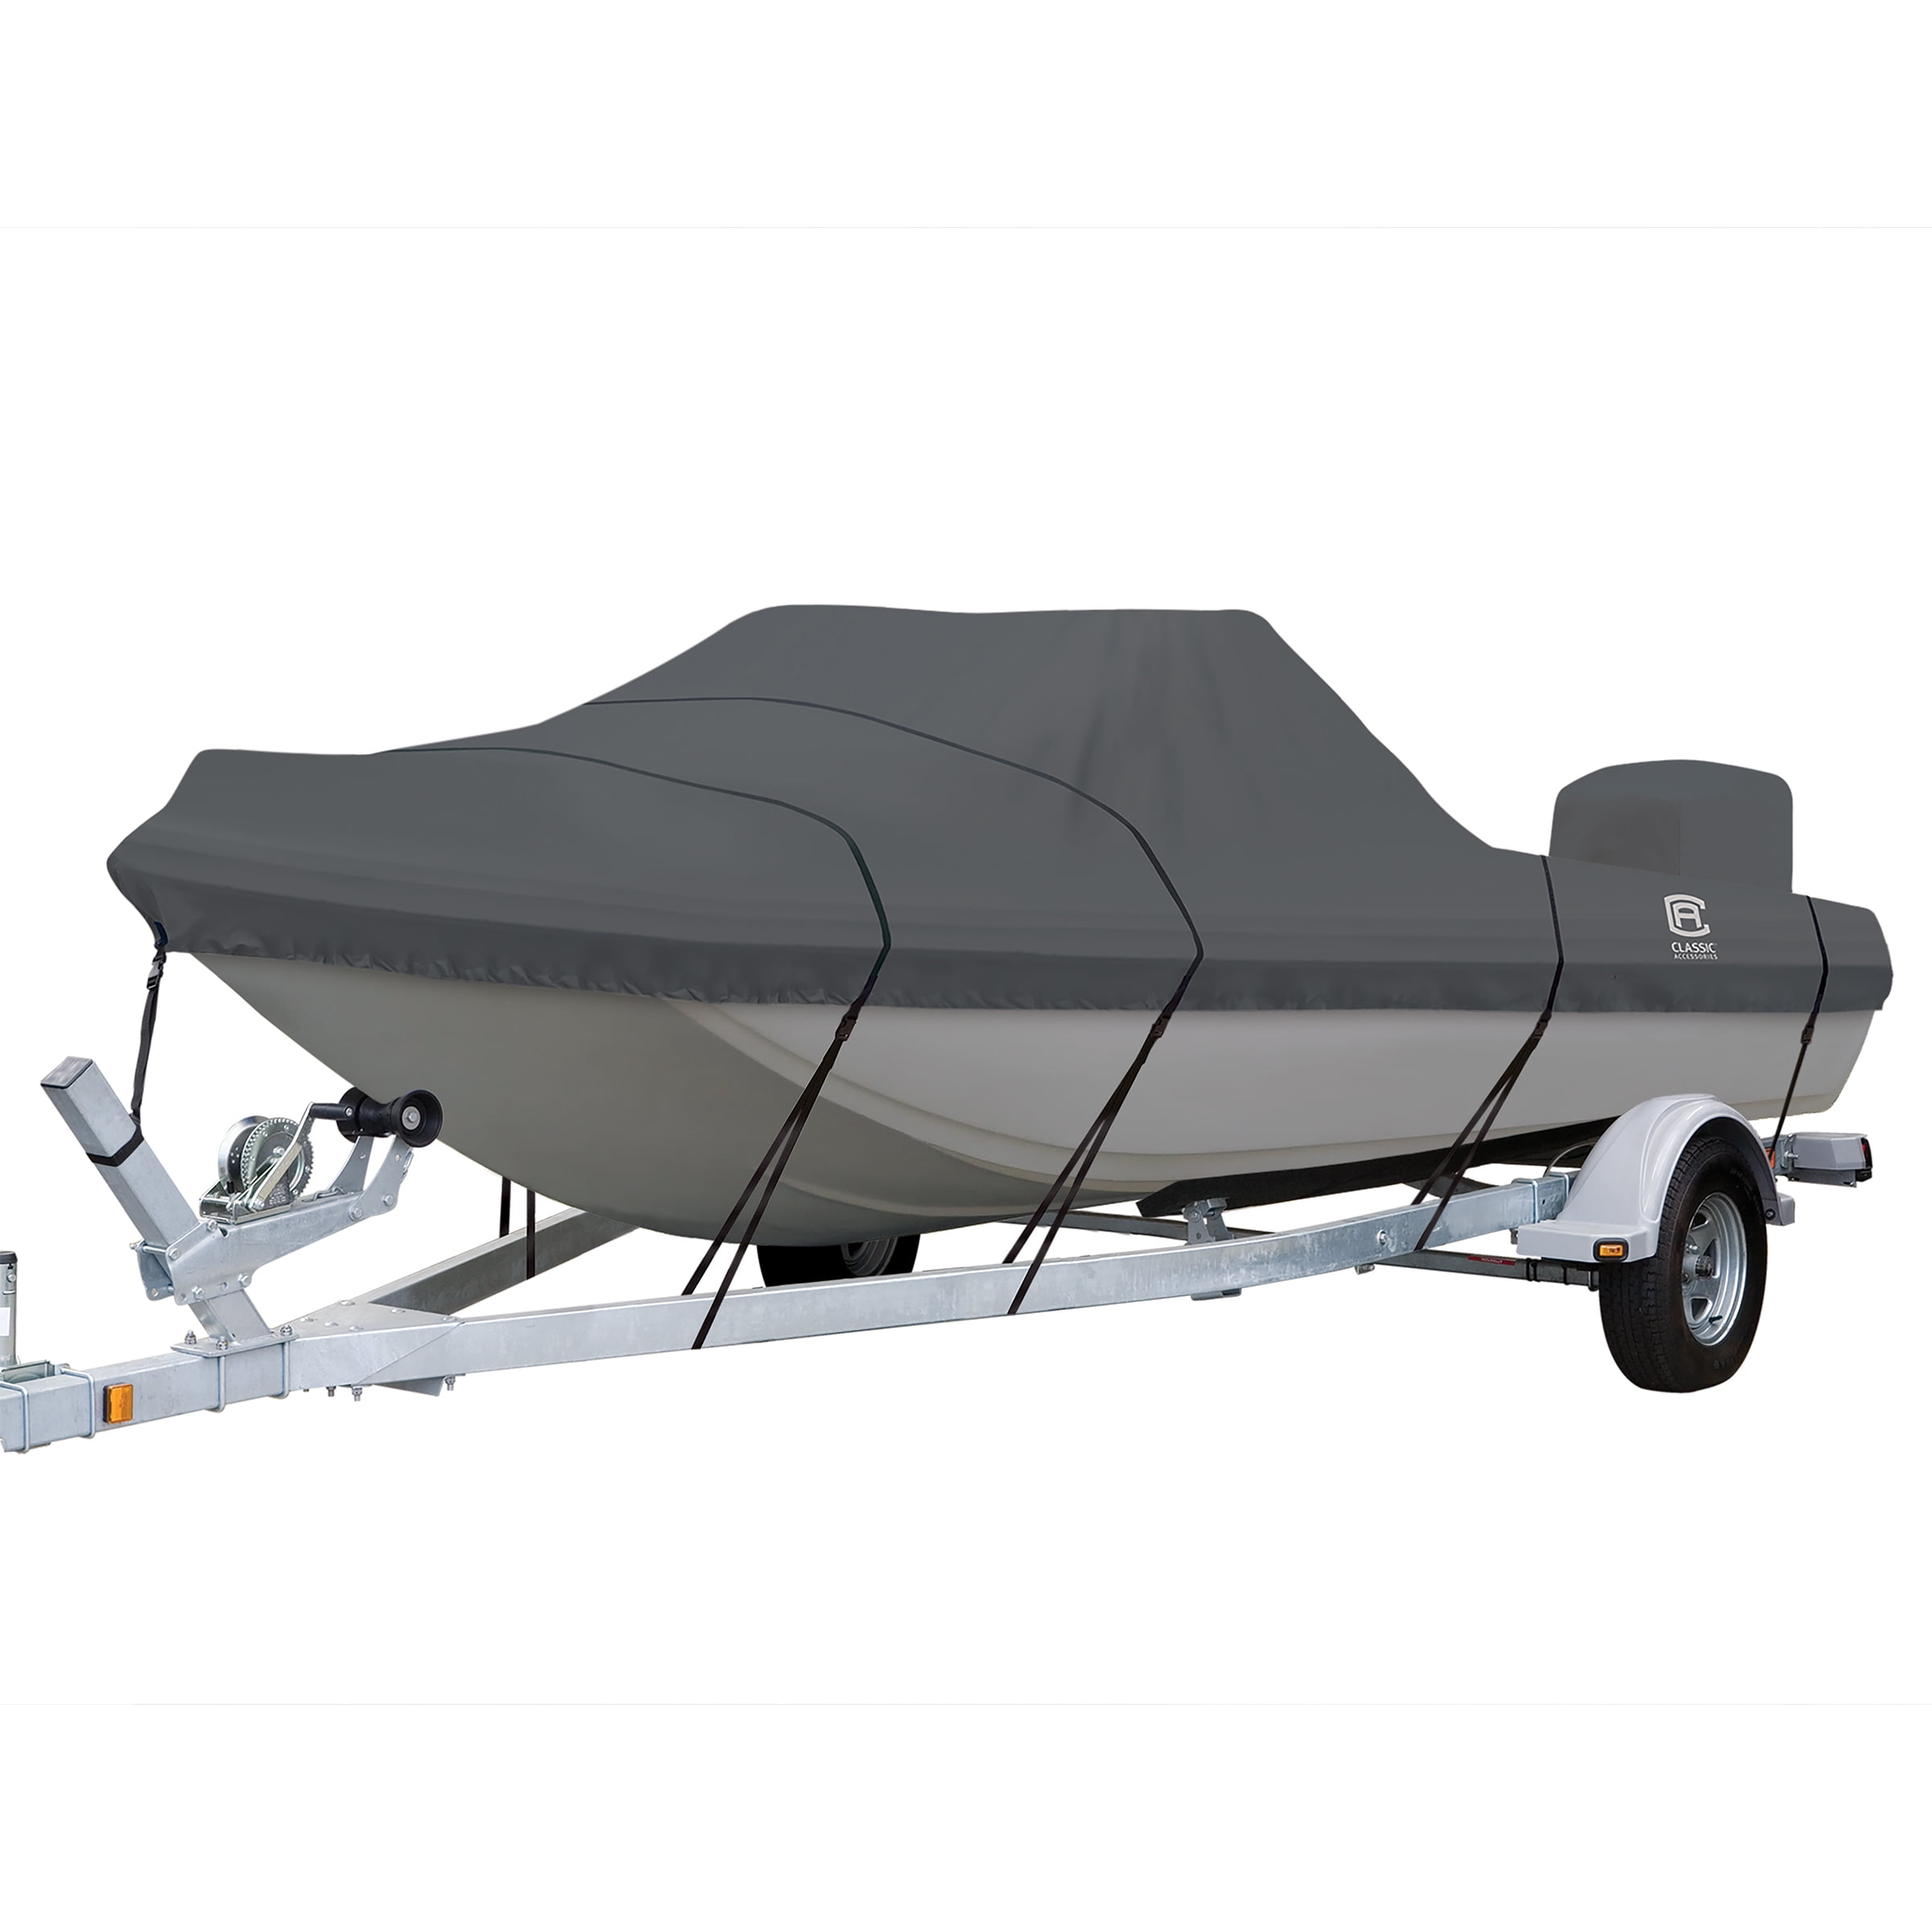 Classic Accessories StormPro HeavyDuty TriHull Outboard Boat Cover, Fits boats 15 ft 6 in 16